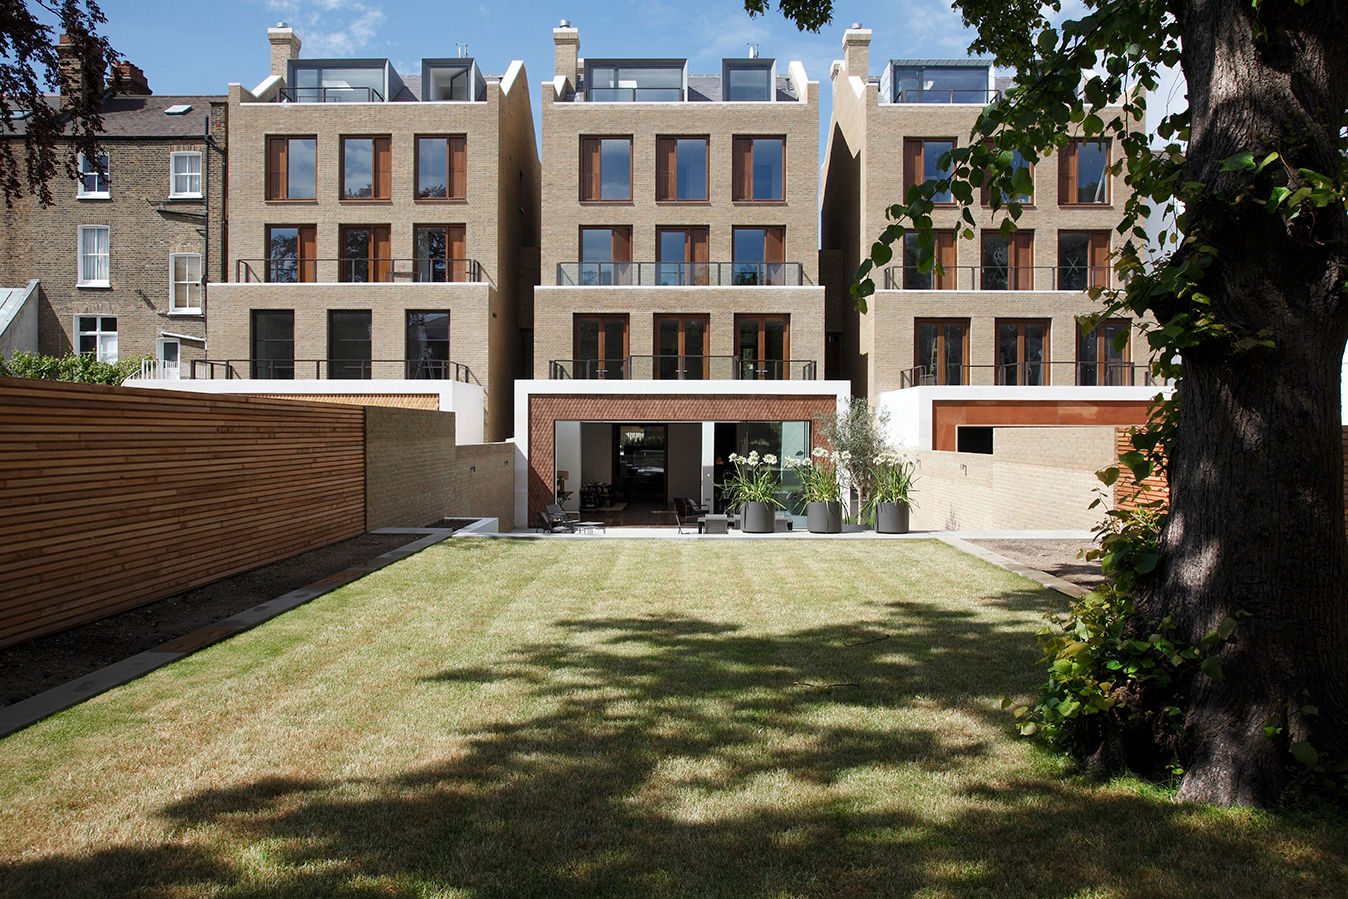 Macauley Road Townhouses, Clapham, Squire and Partners Squire and Partners モダンな庭